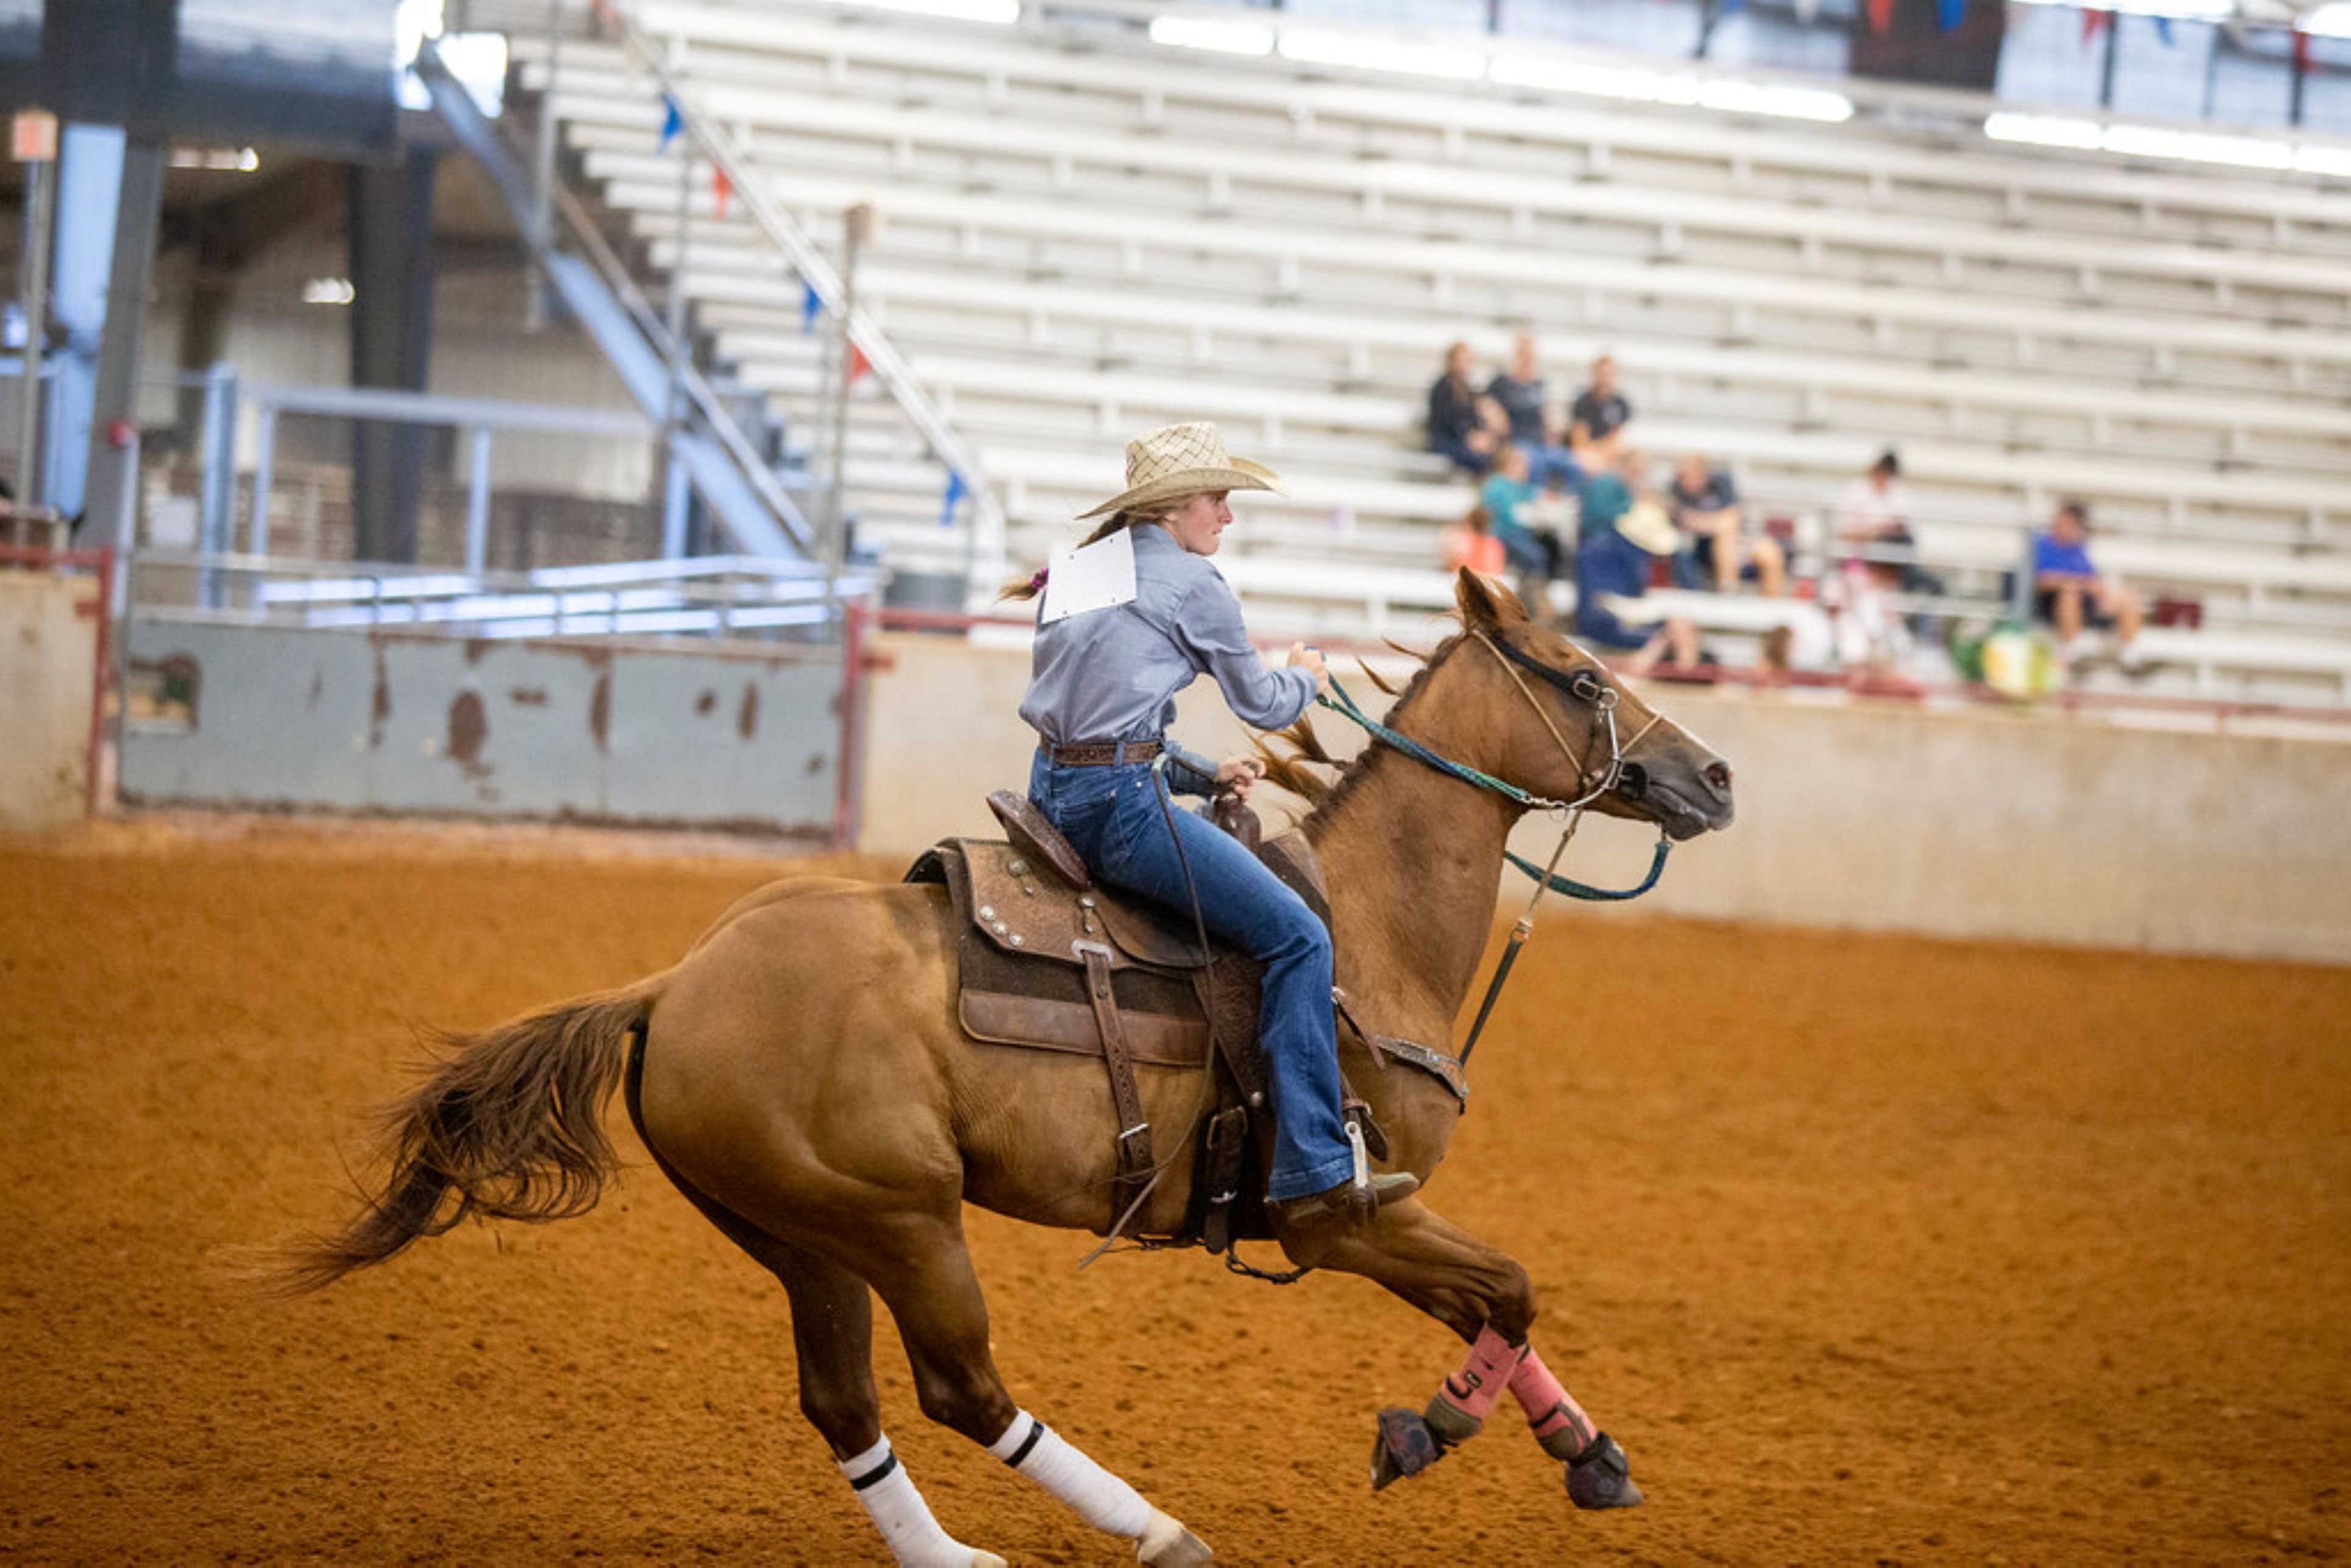 Brazos County Expo and City of College Station